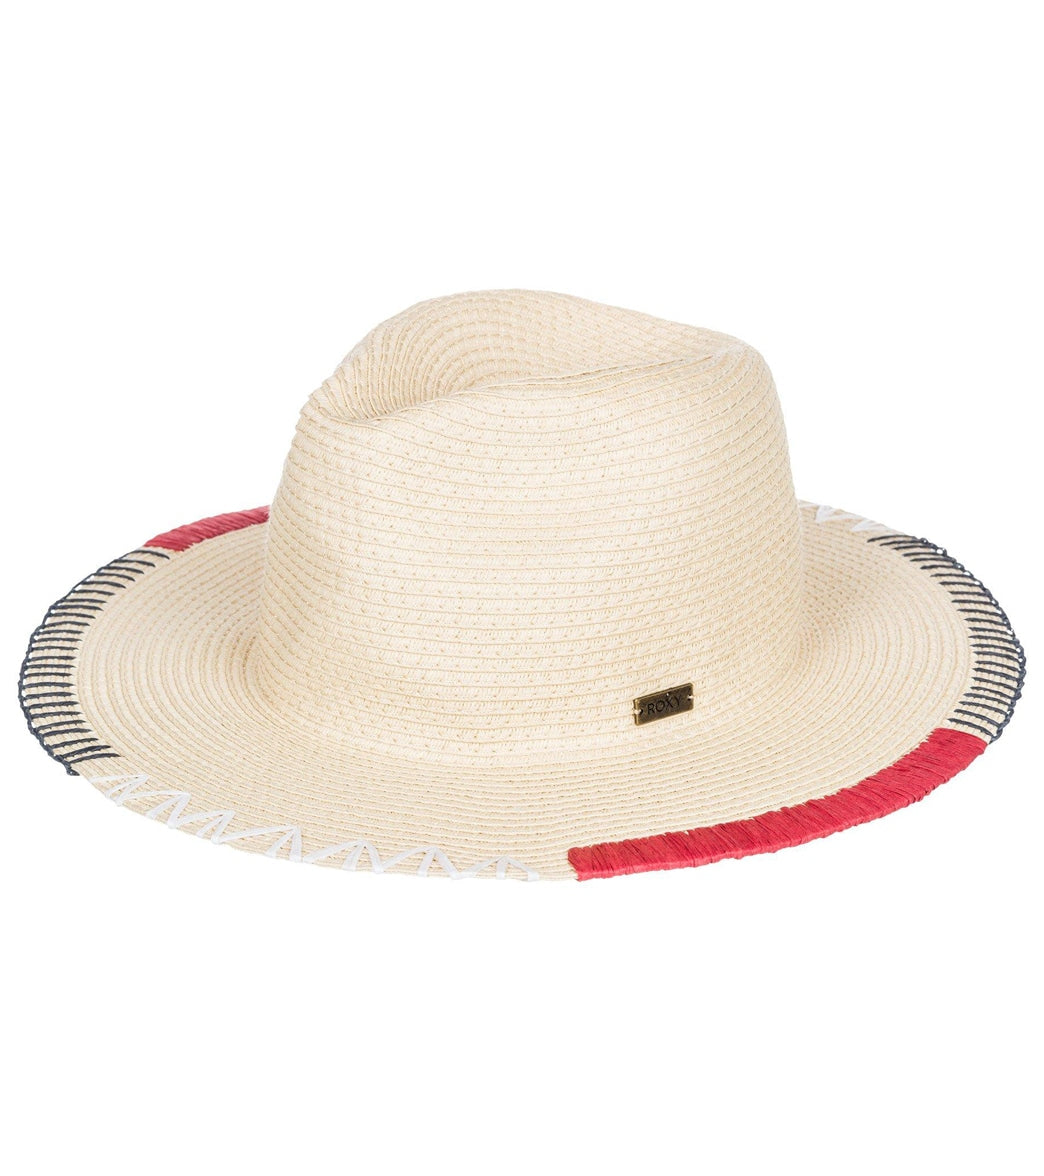 Roxy Women's Only Escape Hat Straw - Natural Medium/Large - Swimoutlet.com